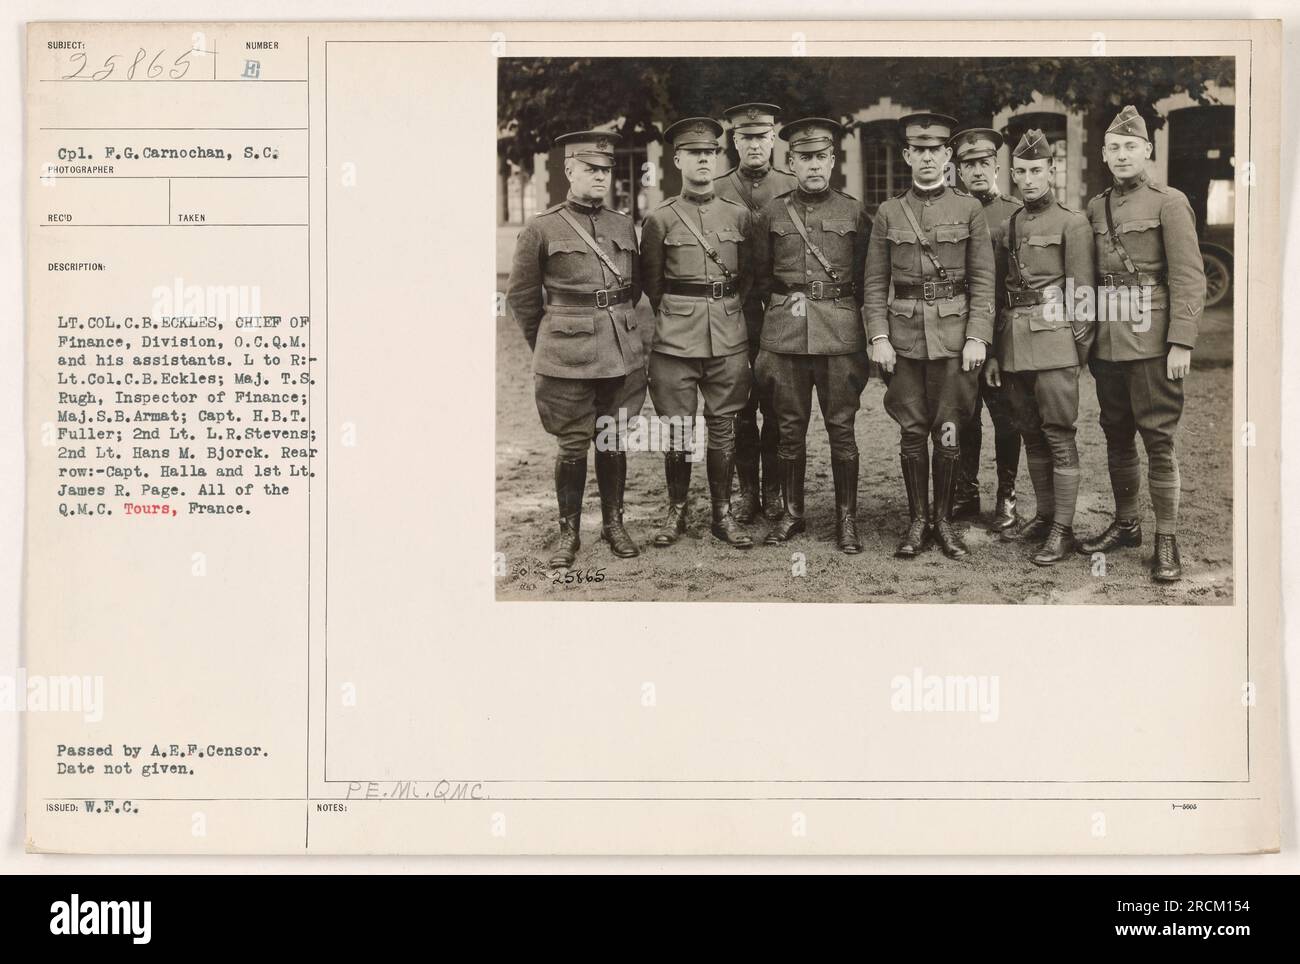 Caption: 'Cpl. F.G. Carnochan, S. C., in a group photo with Lt. Col. C.B. Eckles, Chief of Finance, Division, O.C.Q.M., and his assistants. Left to right: Lt. Col. C.B. Eckles; Maj. T.S. Rugh, Inspector of Finance; Maj.S.B. Armat; Capt. H.B.T. Fuller; 2nd Lt. L. R. Stevens; 2nd Lt. Hans M. Bjorck. Rear row: Capt. Halla and 1st Lt. James R. Page. All members of the Q.M.C, stationed in Tours, France during World War One.' Stock Photo